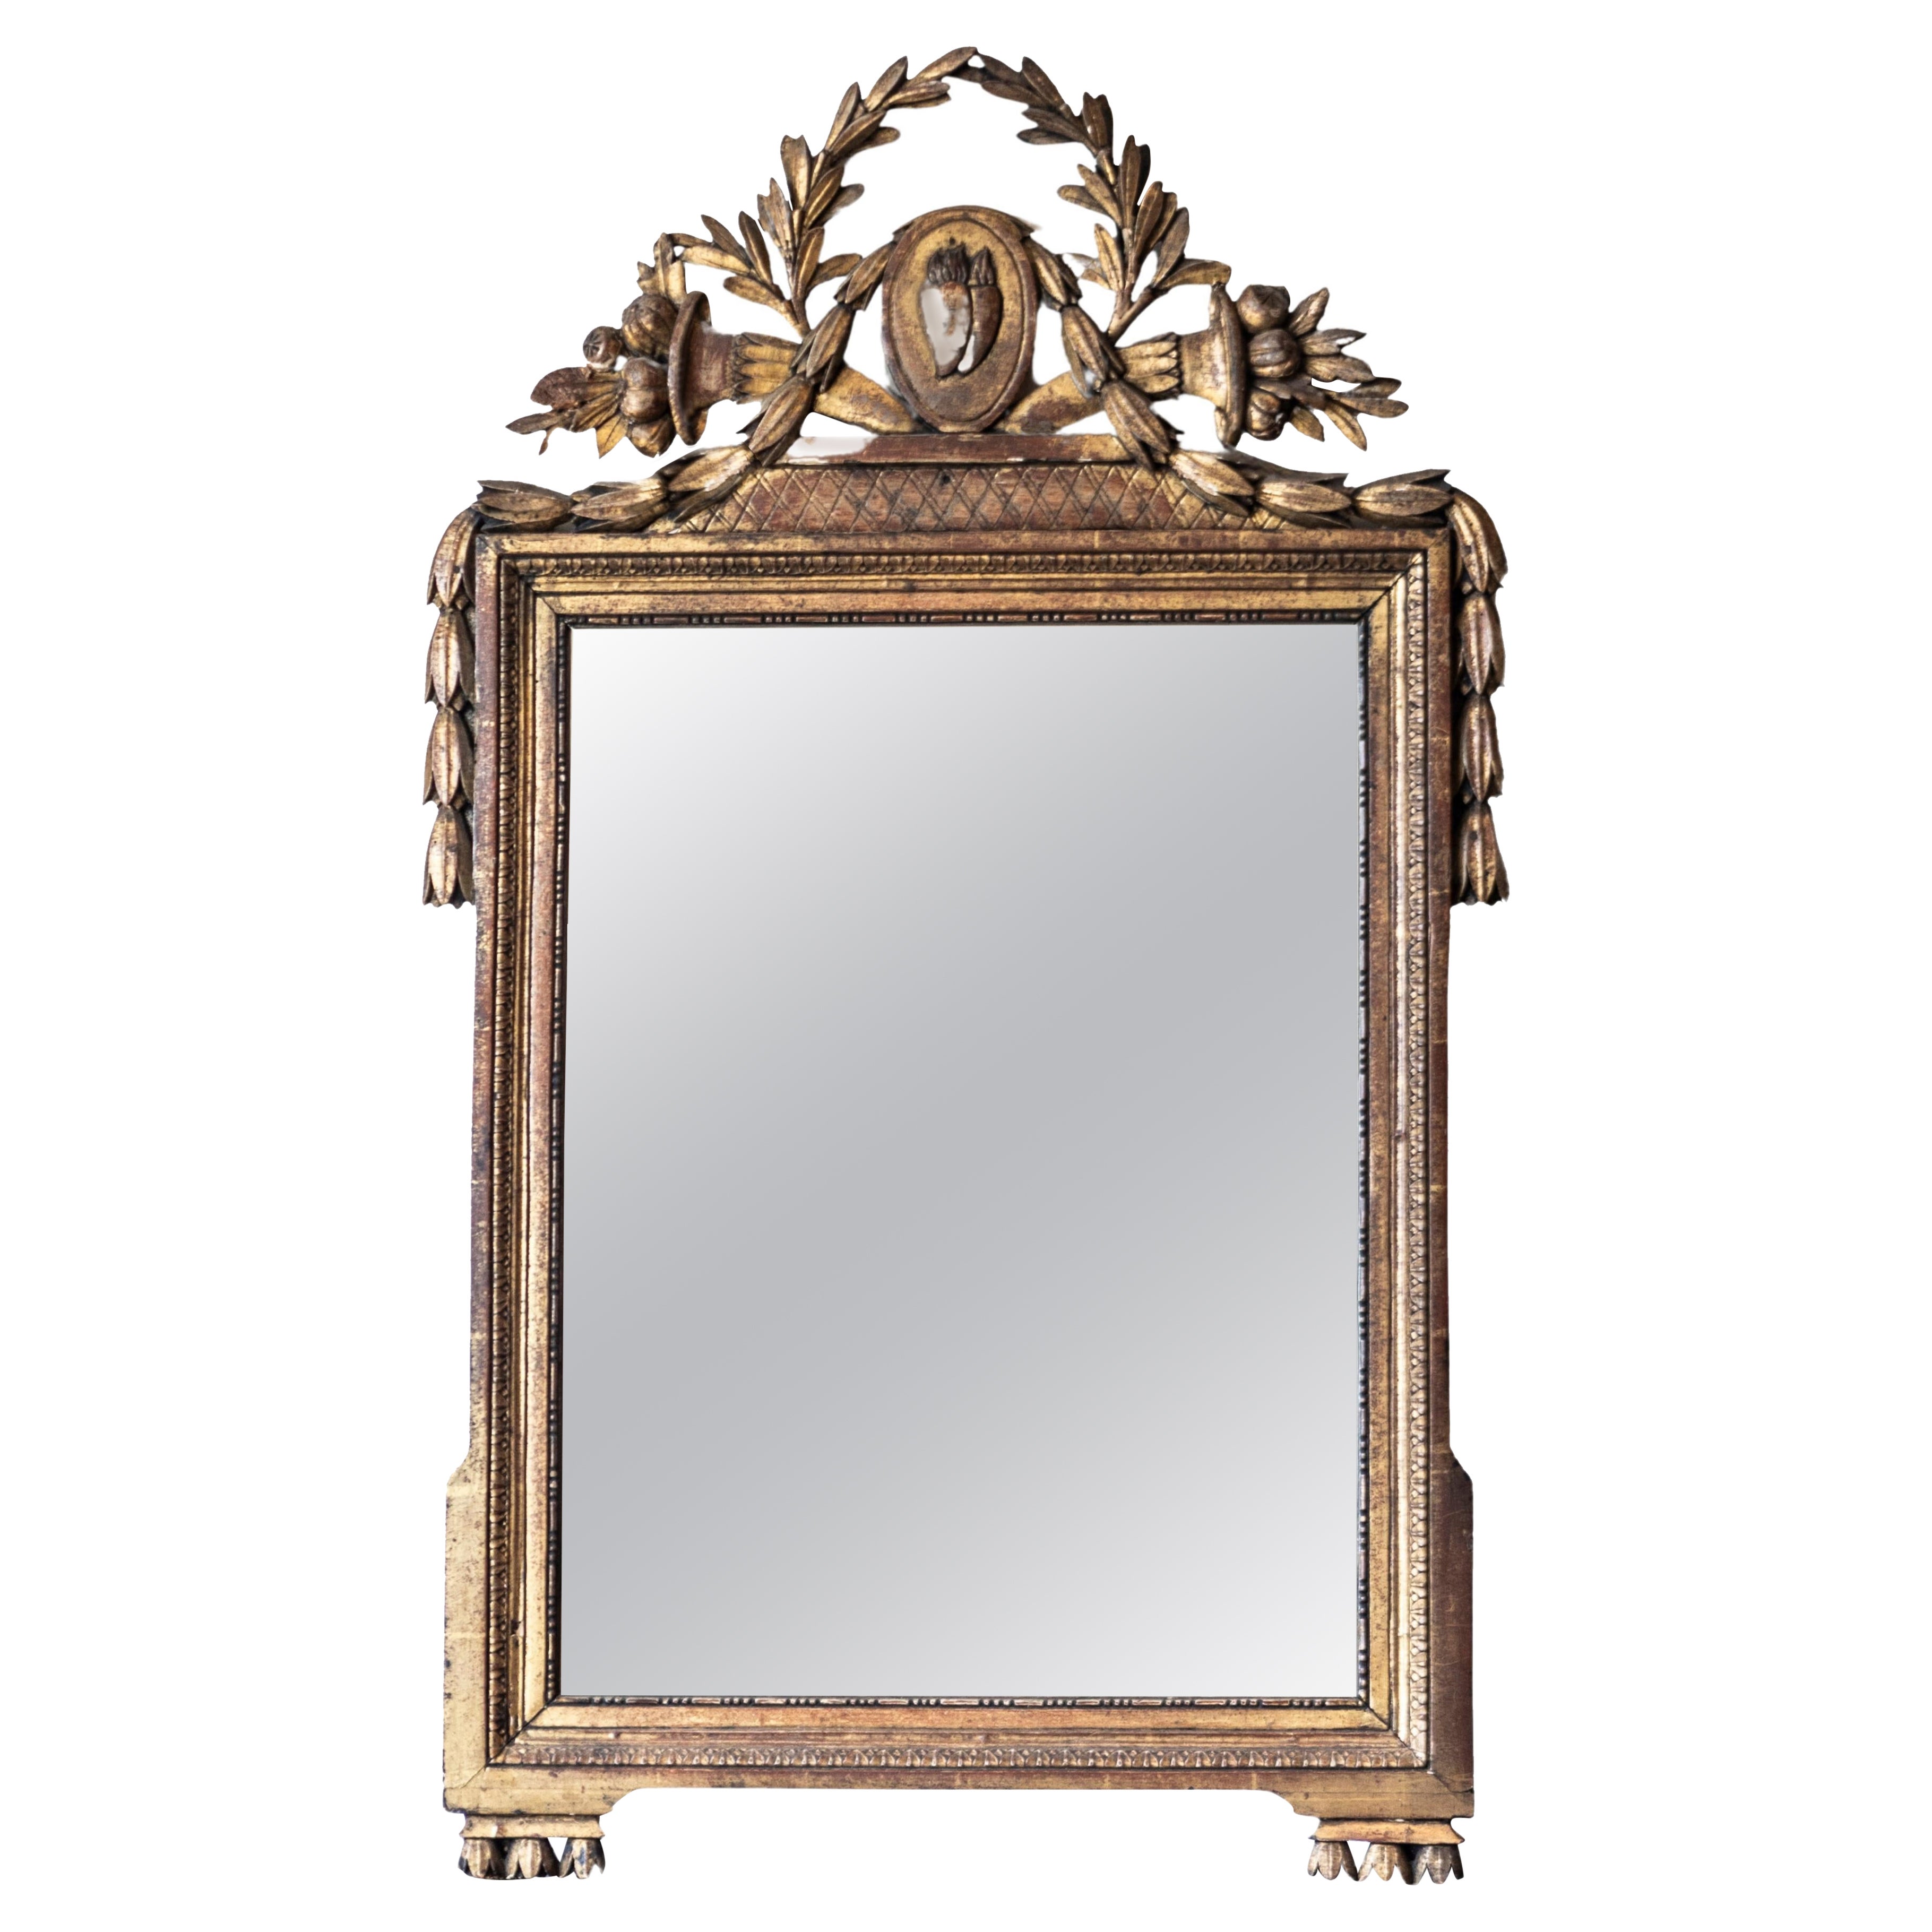 French Louis XVI Period 18th Century Giltwood Mirror with Carved Hearts on Fire For Sale